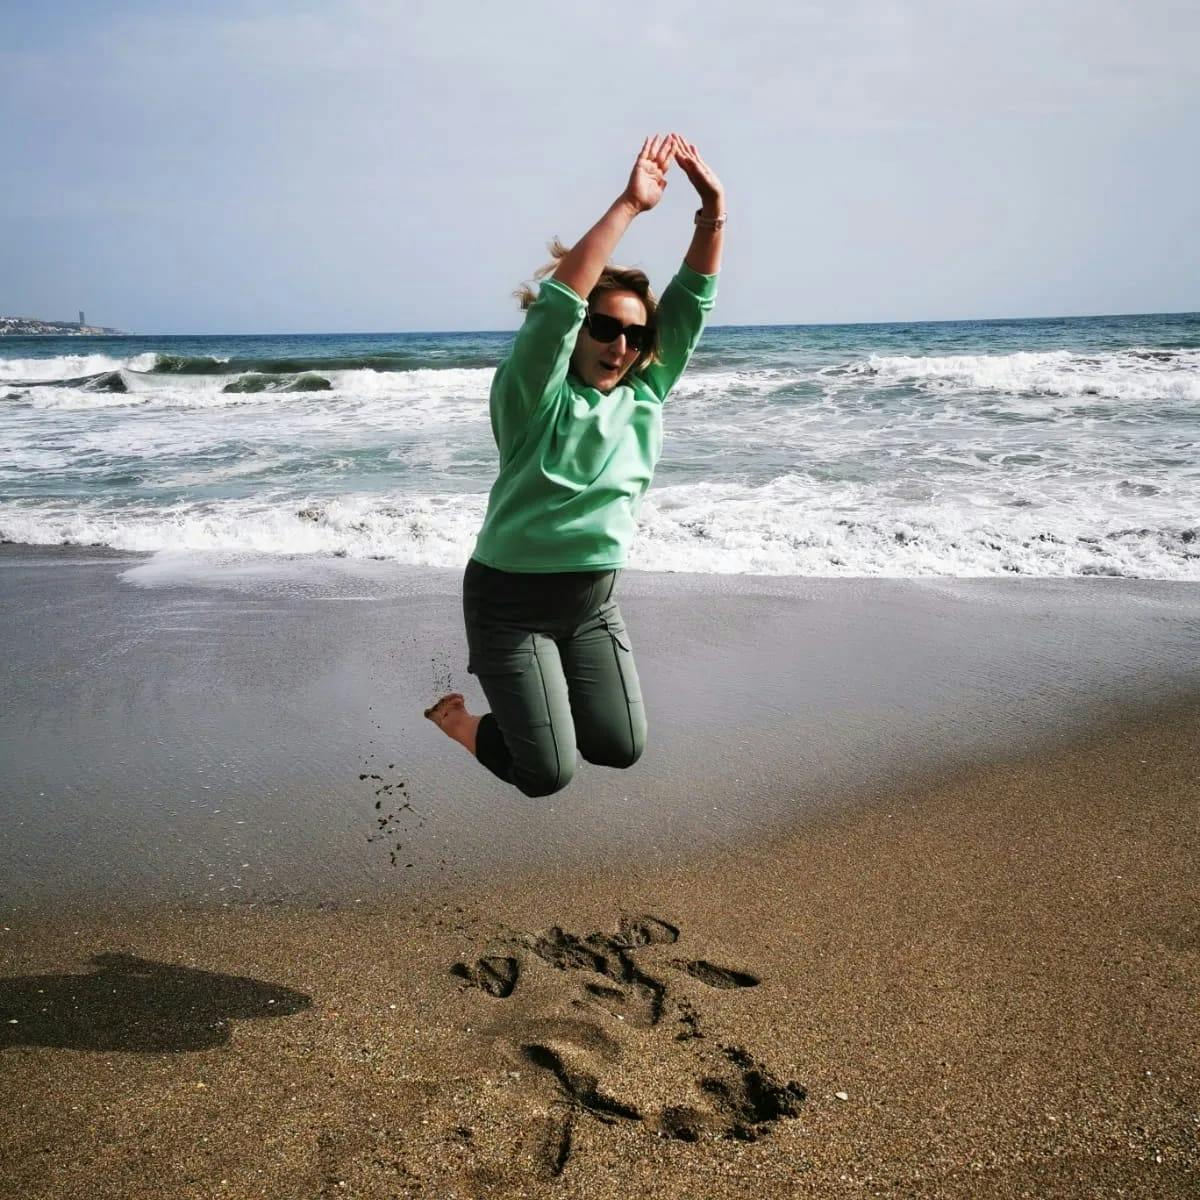 Teacher from ZSE jumping on the beach